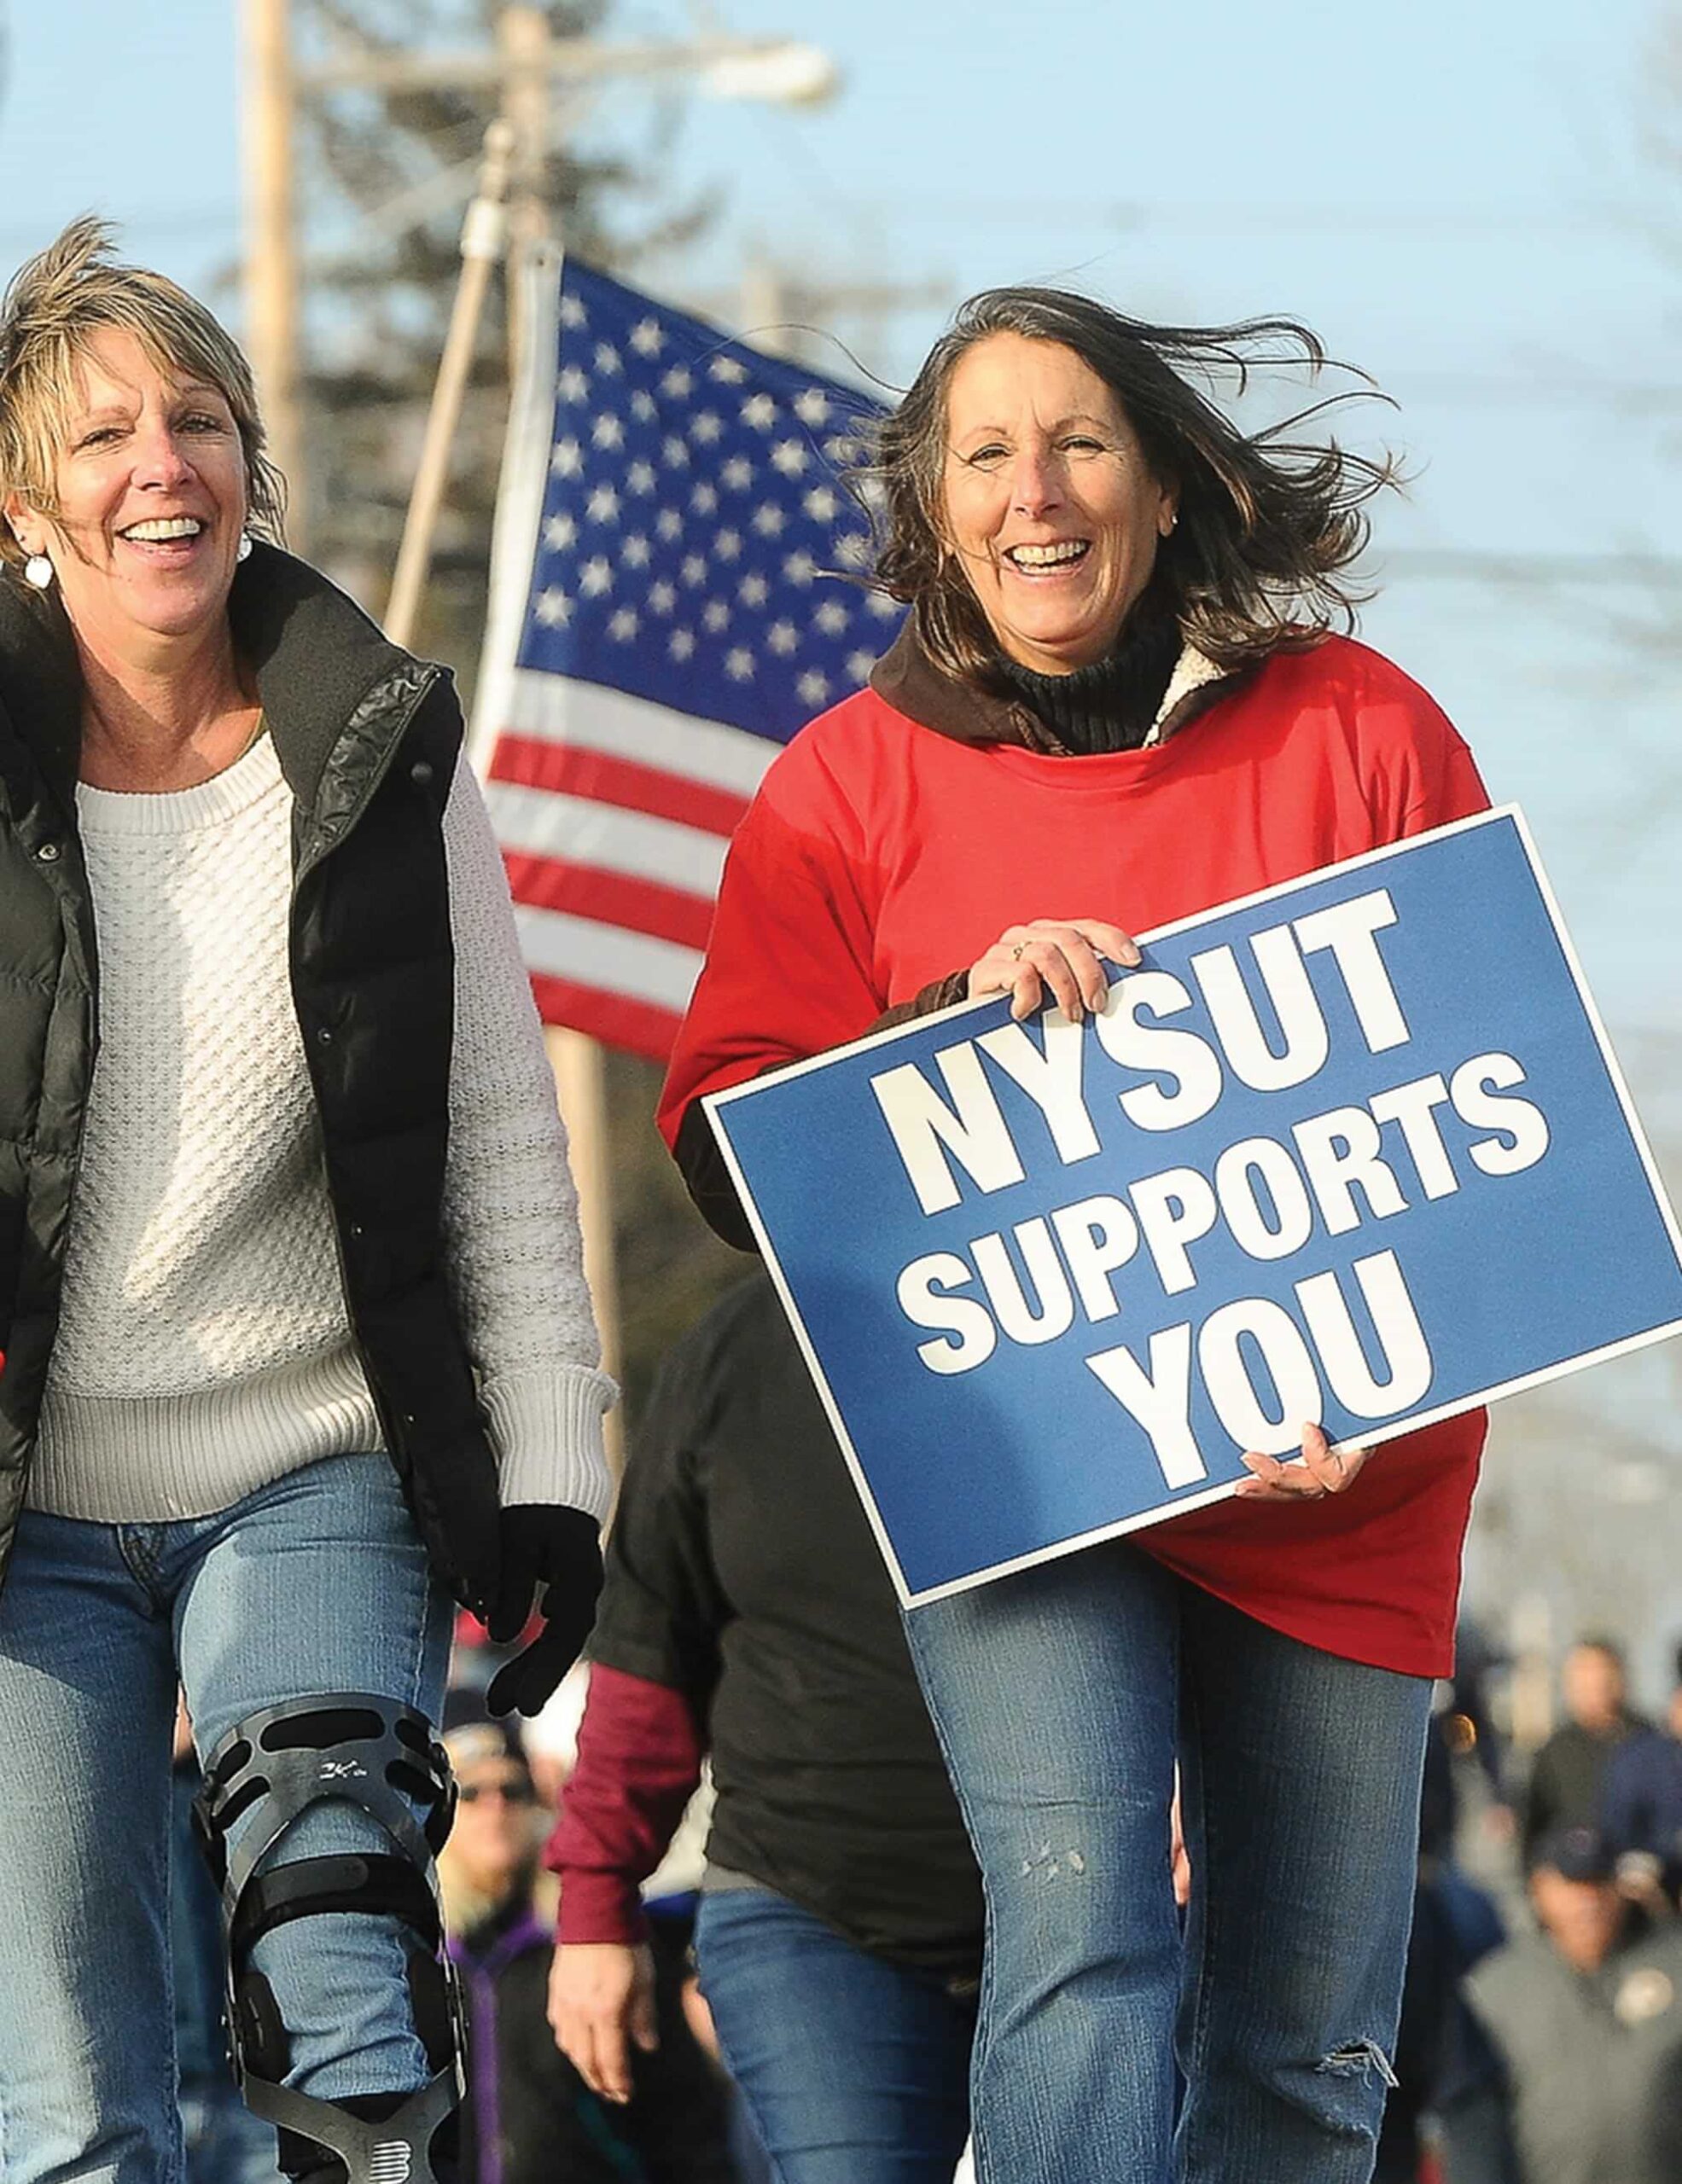 two women smiling during protest while one holds a sign that says "NYSUT supports you"